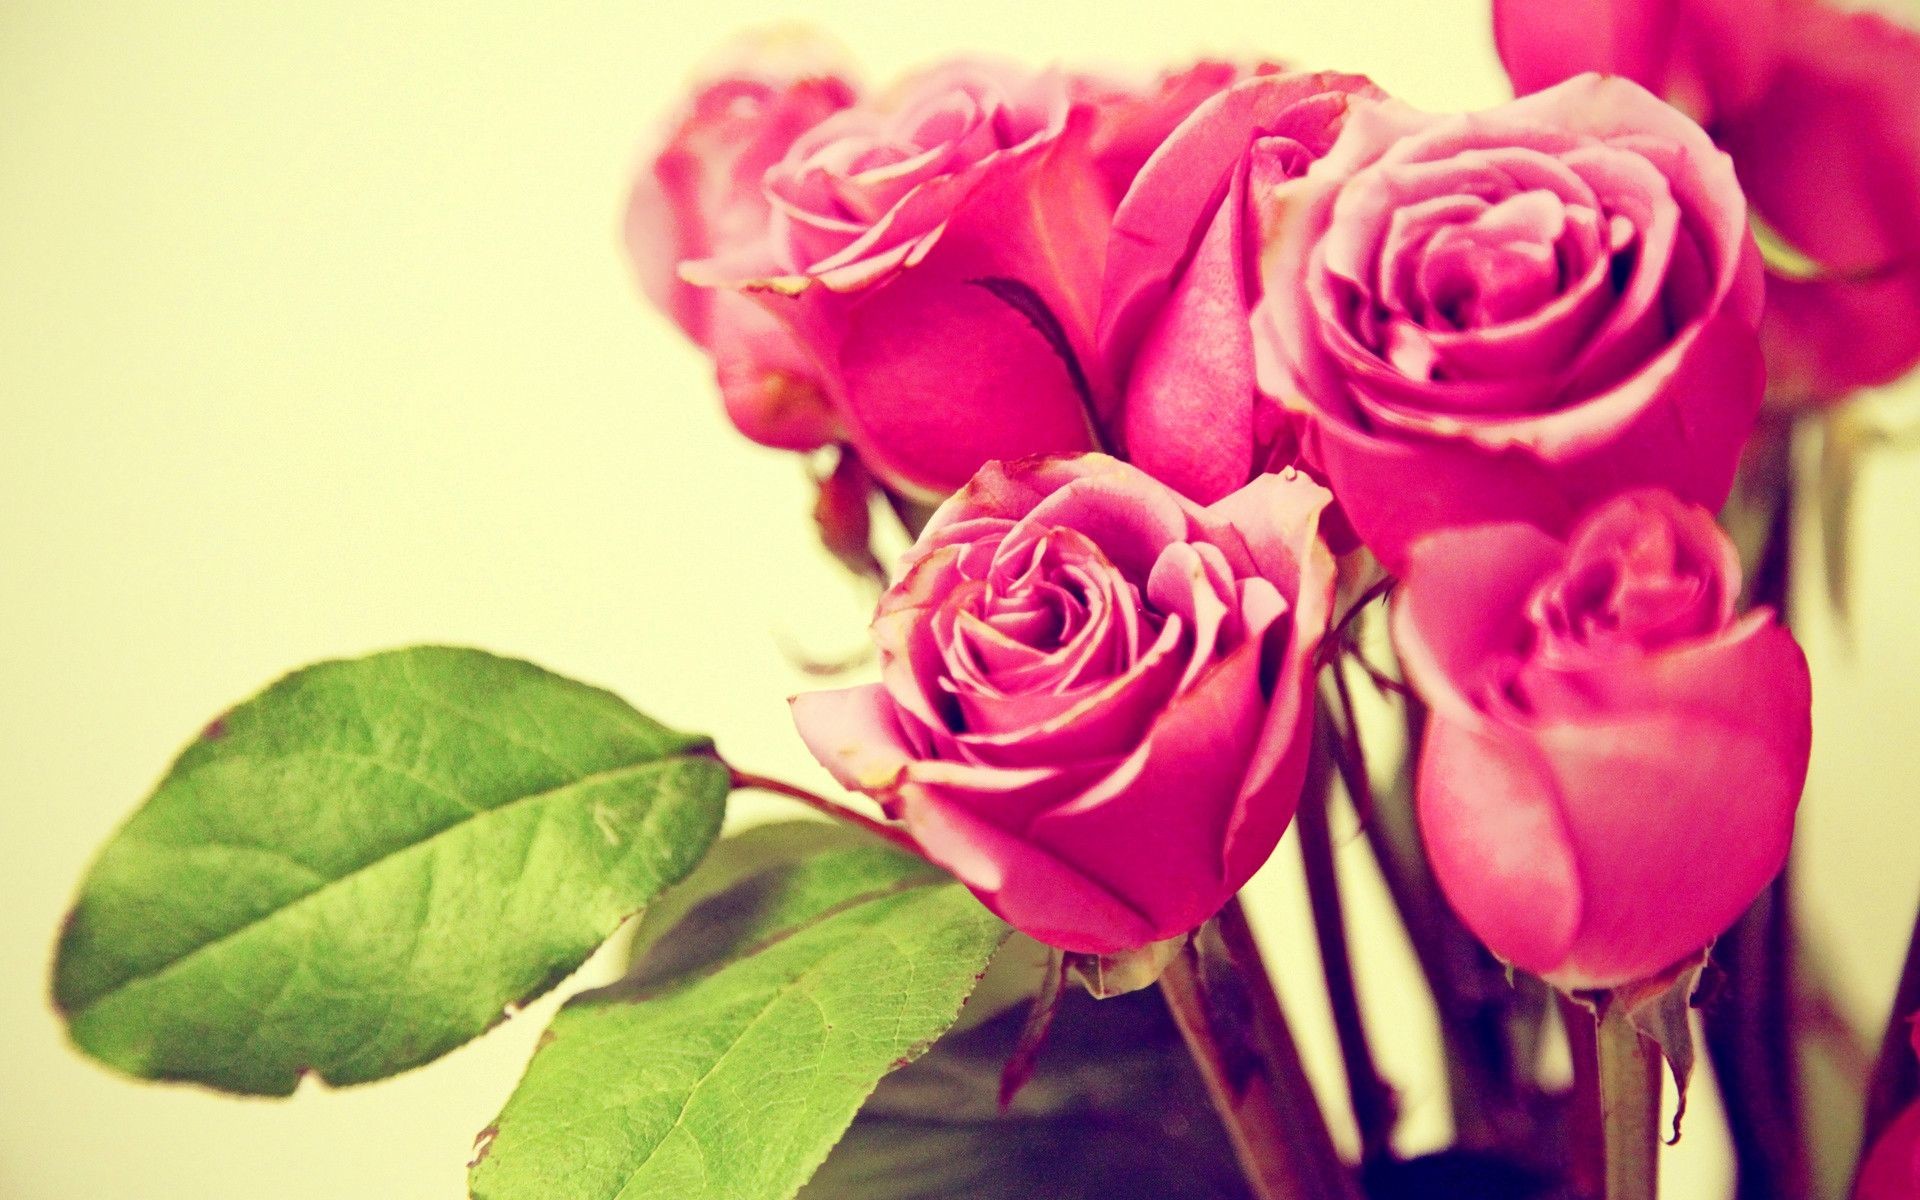 1920x1200 Touched pink rose wallpaper ï¼ Flower Wallpapers Free download